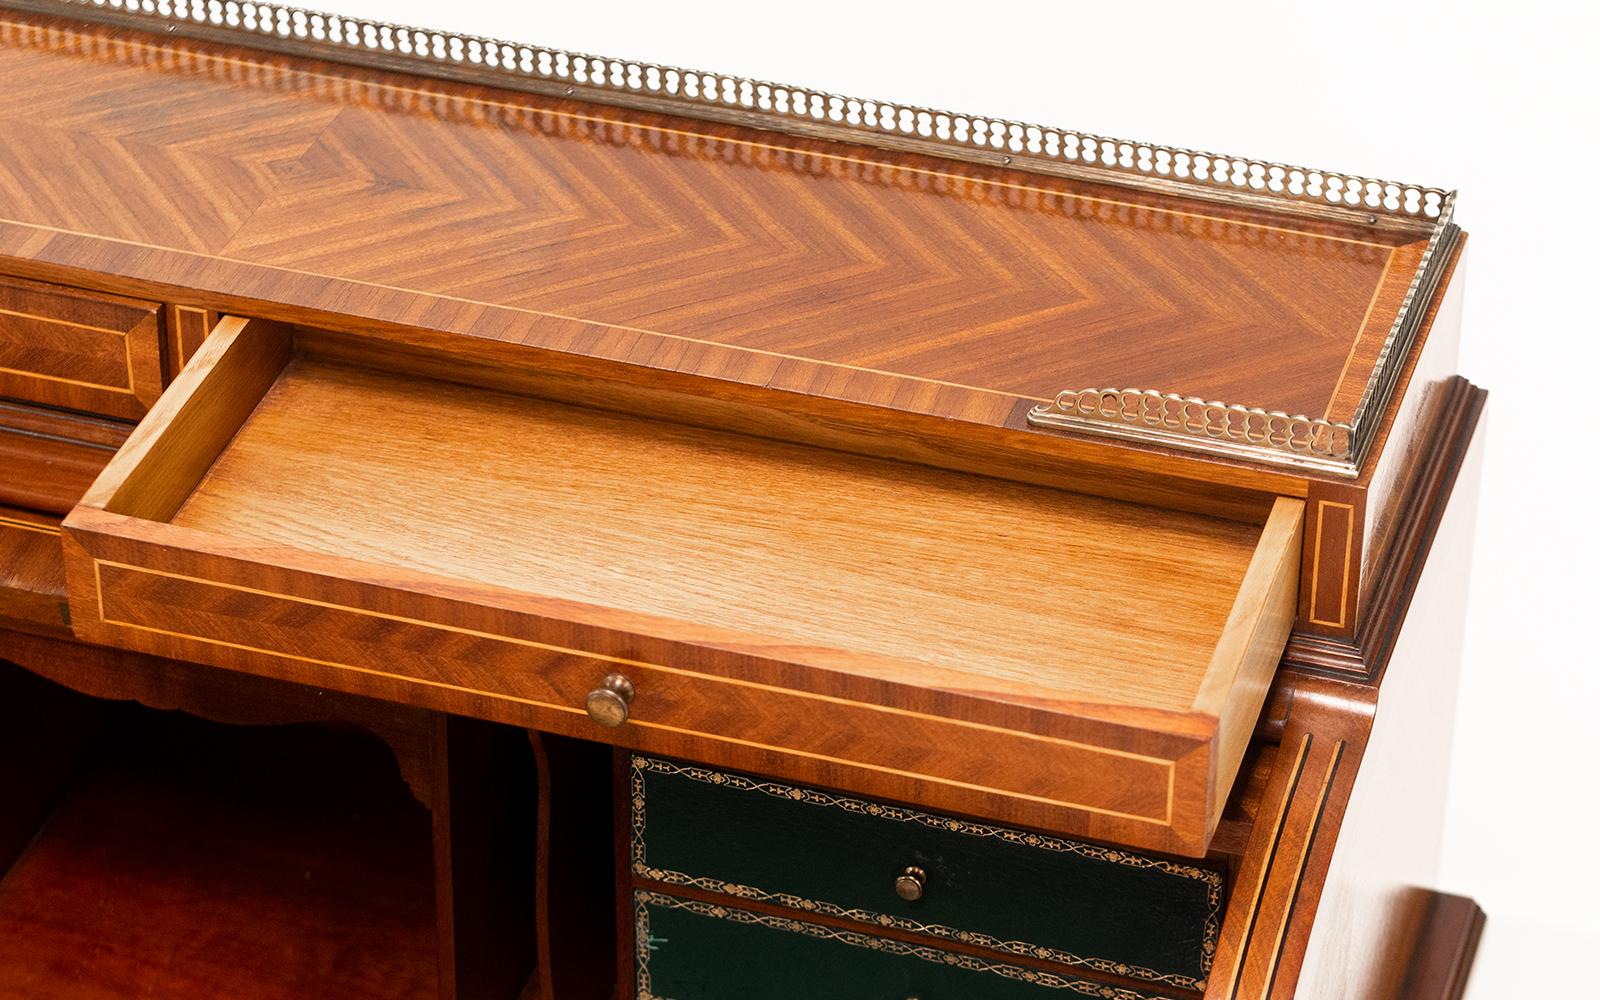 French Kingwood desk

A roll-top French kingwood and mahogany cylinder desk.

As you lift the roll-top front, the desk automatically slides out to reveal the leather work surface and drawers above.

Pierced gallery top gallery, on four